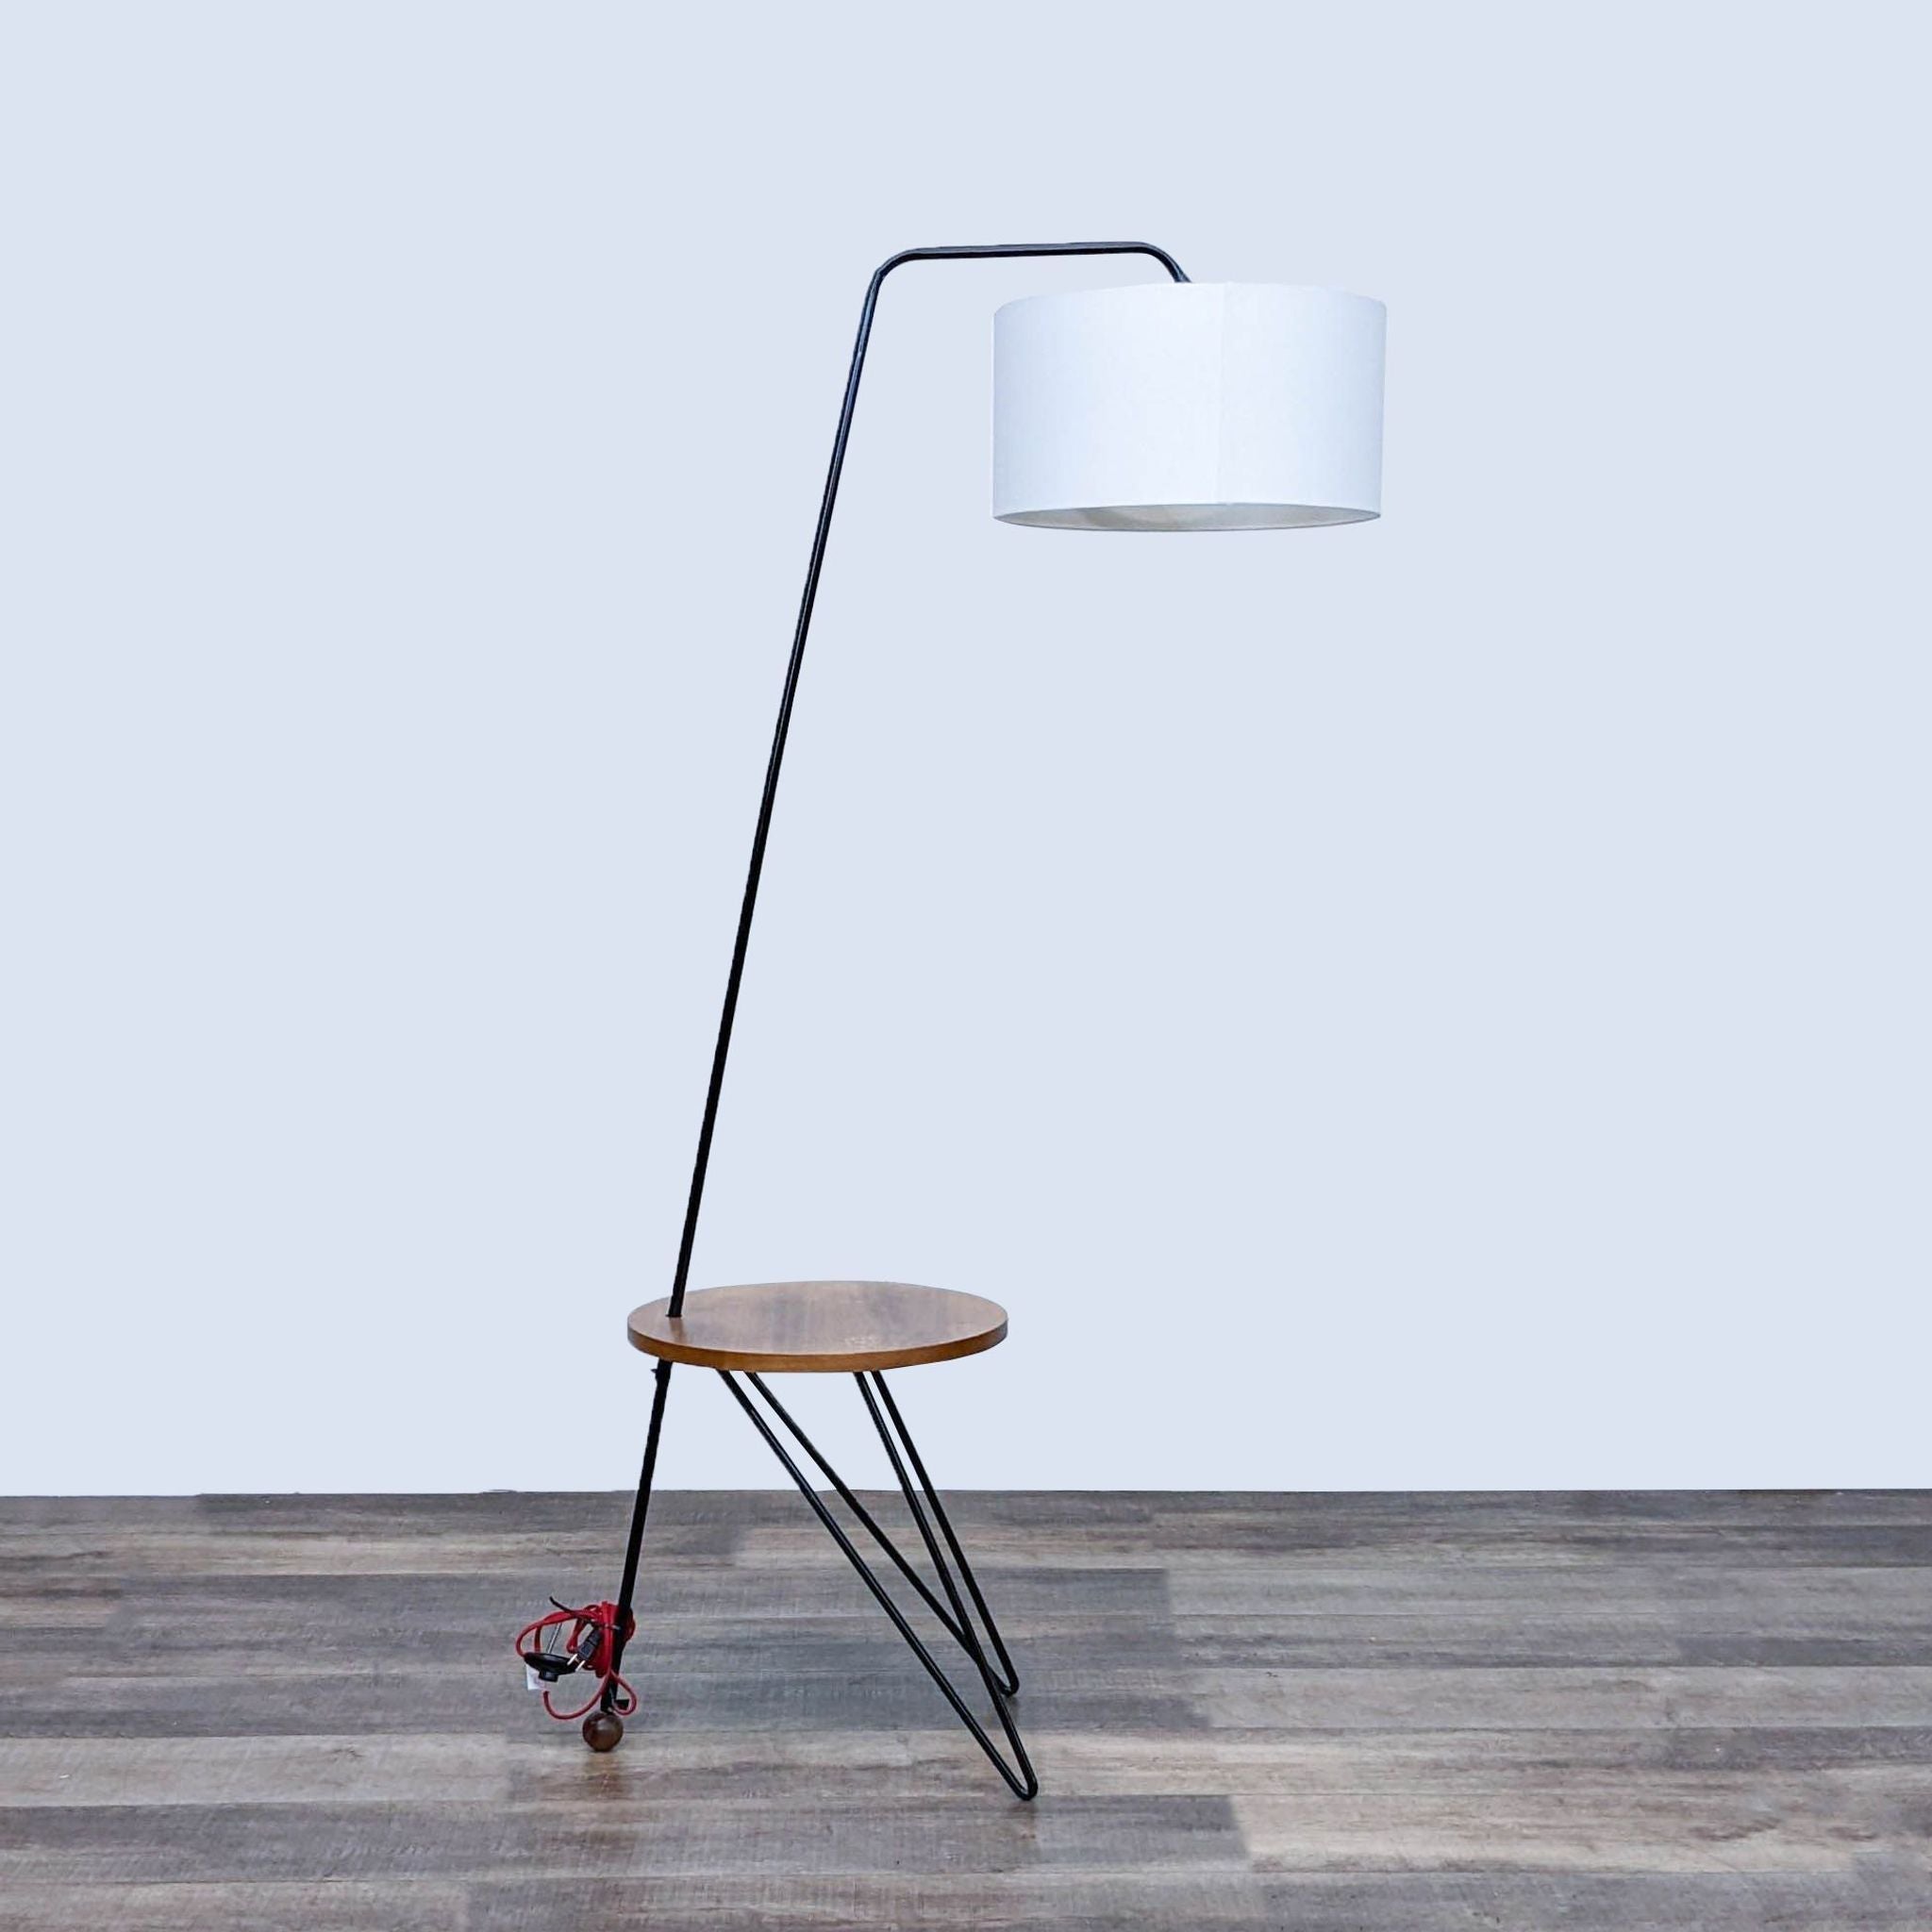 Reperch brand modern floor lamp with white shade and angular black frame incorporating a wooden shelf.